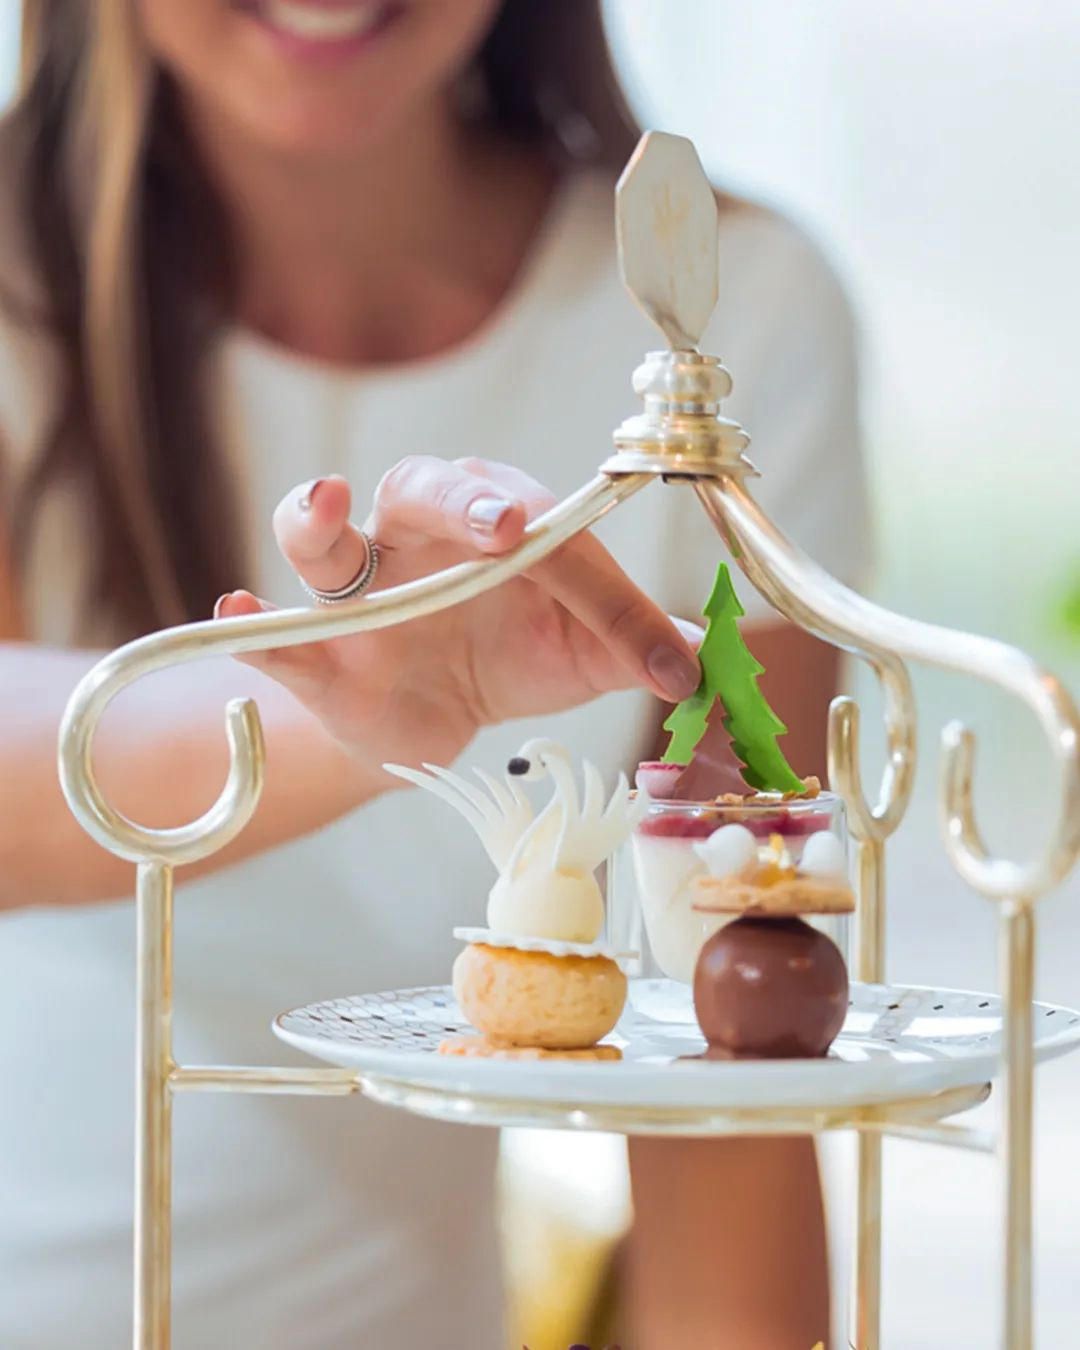 Address Sky View - This festive season, indulge in scrumptious delights over Afternoon Tea